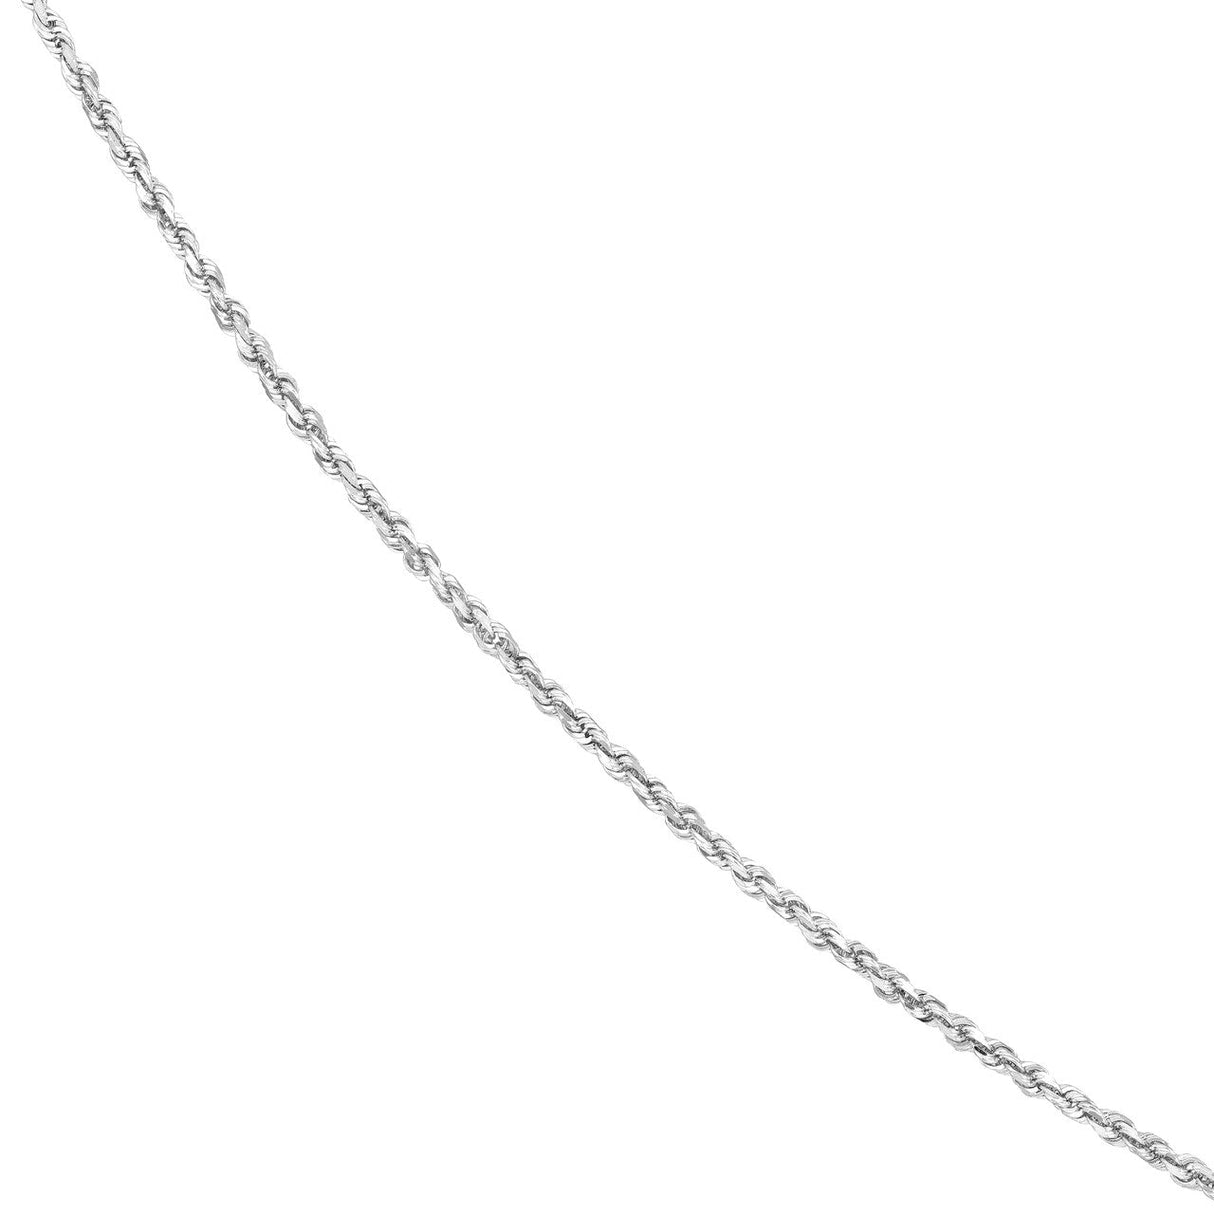 10K Gold Chain, 22", 1.8mm D/C Rope Chain with Lobster Lock, Gold Layered Chain, Gold Layered Necklaces, - Diamond Origin